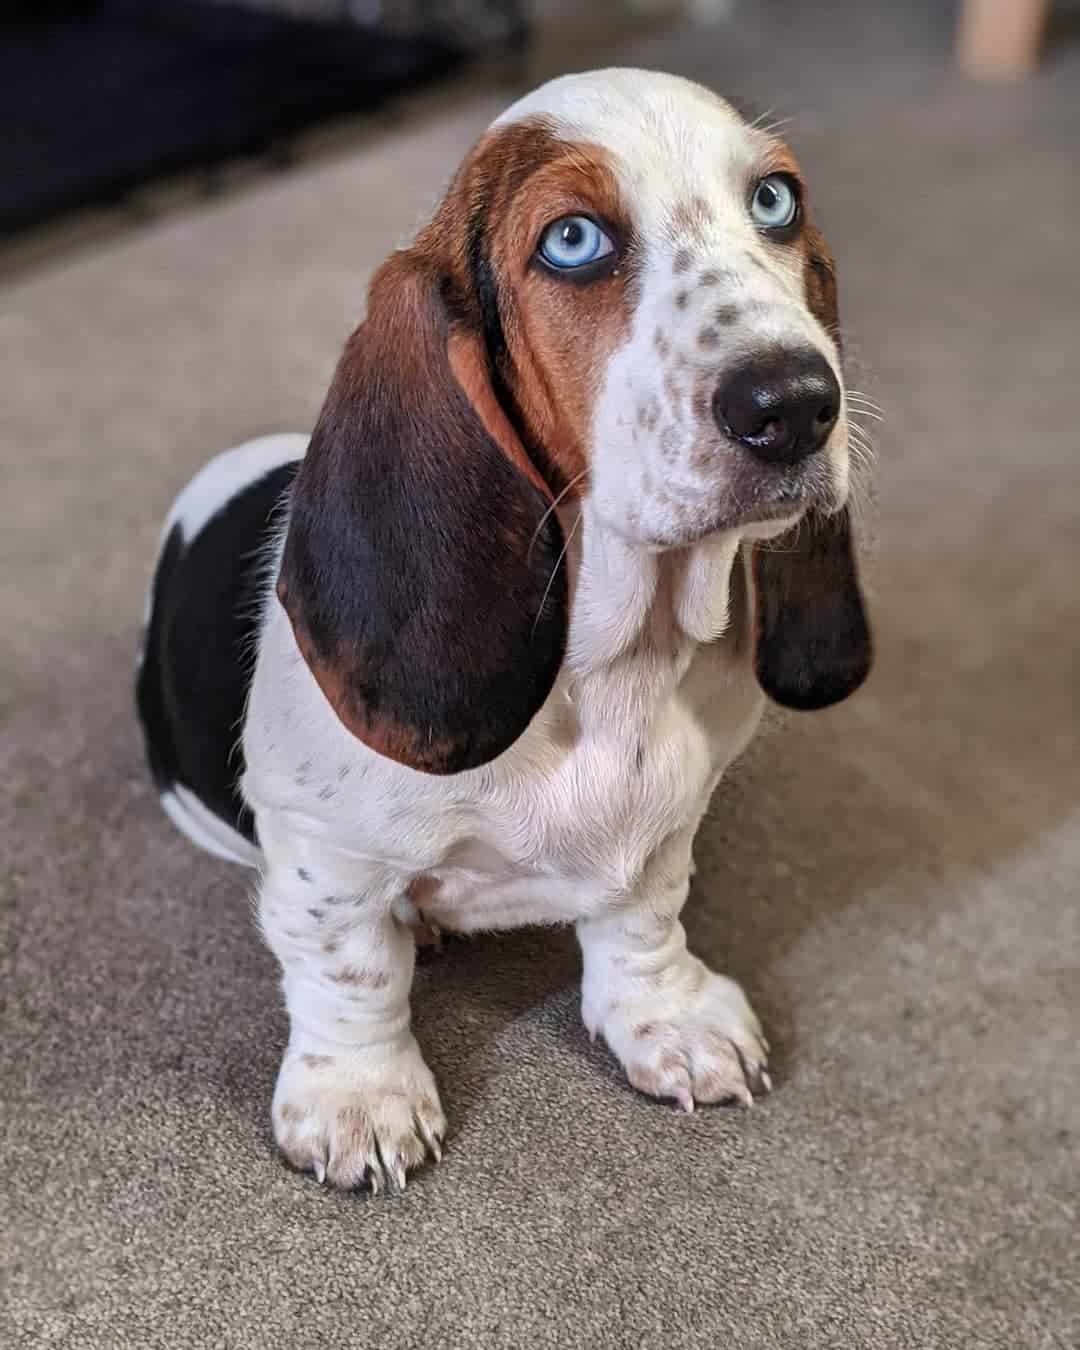 Blue Basset Hound: A Very Rare Breed, Or A Genetic Error?